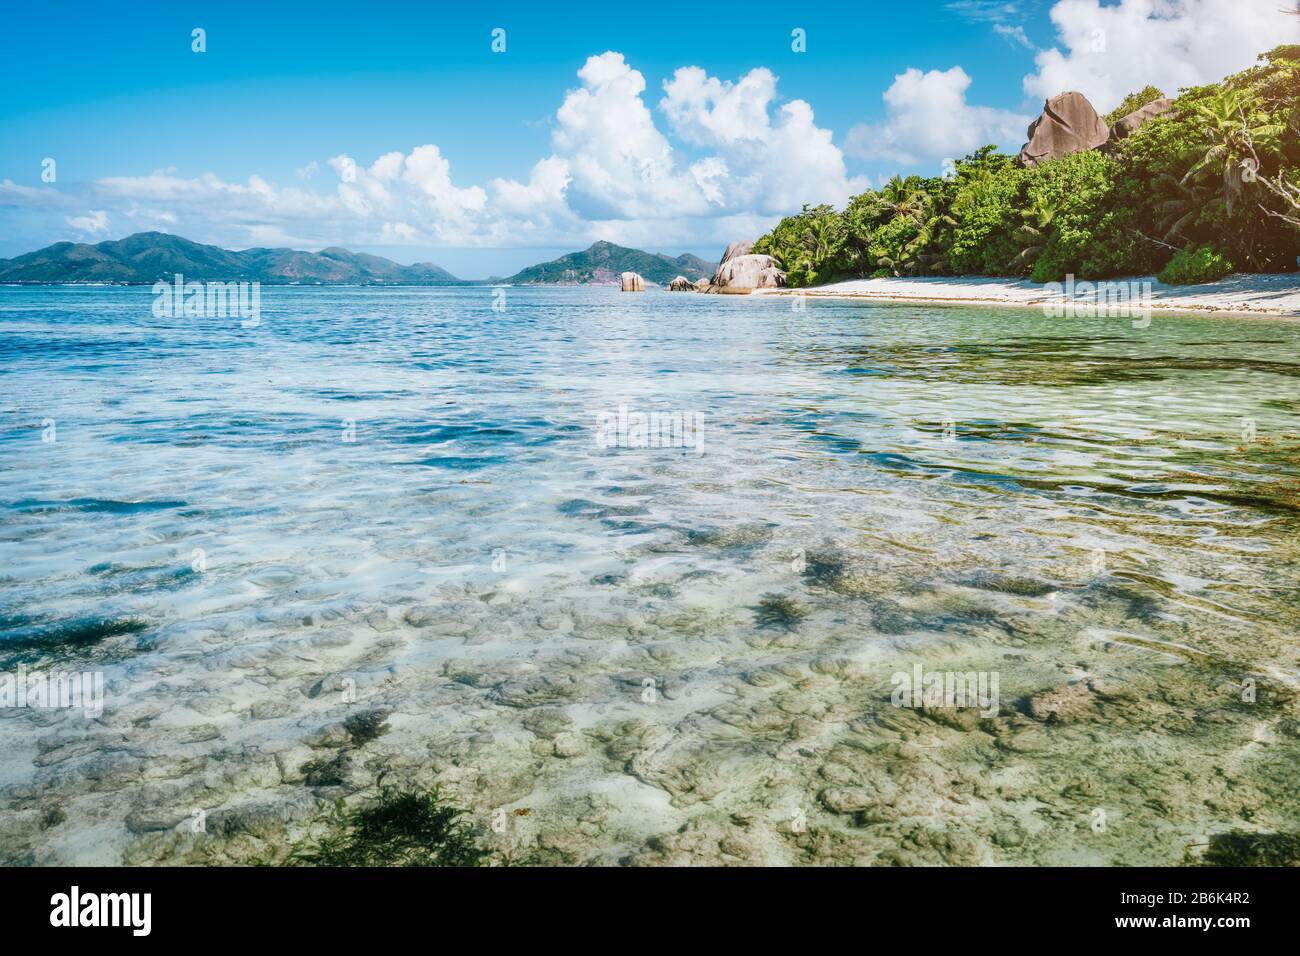 Vacation holiday on beautiful Anse Source D'Argent beach. Shallow lagoon, granite boulders, La Digue Island, Seychelles. Luxury paradise travel concep Stock Photo